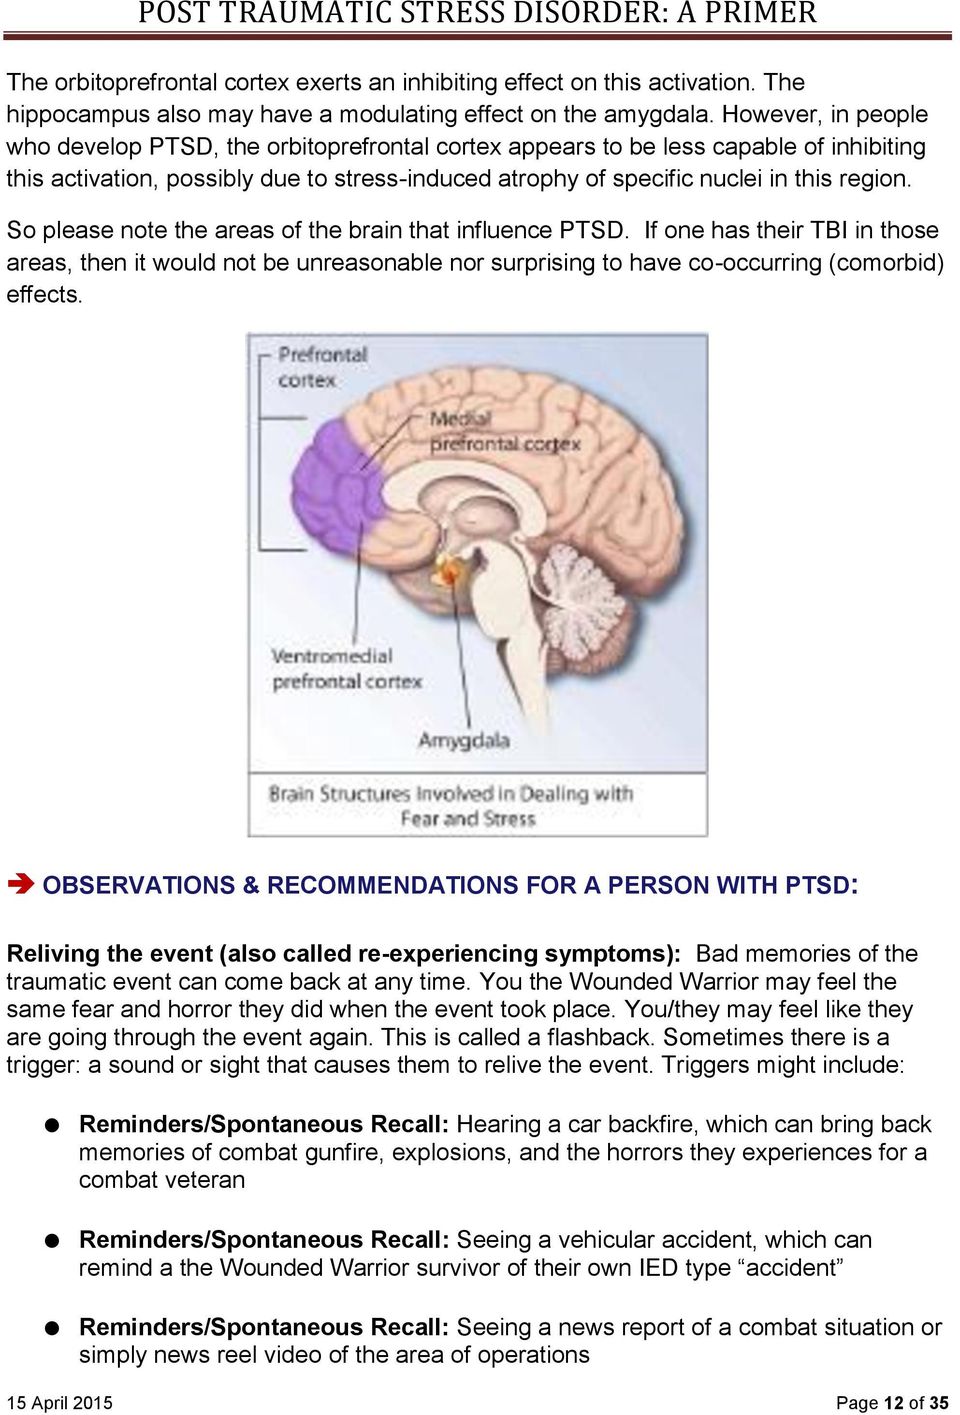 So please note the areas of the brain that influence PTSD. If one has their TBI in those areas, then it would not be unreasonable nor surprising to have co-occurring (comorbid) effects.